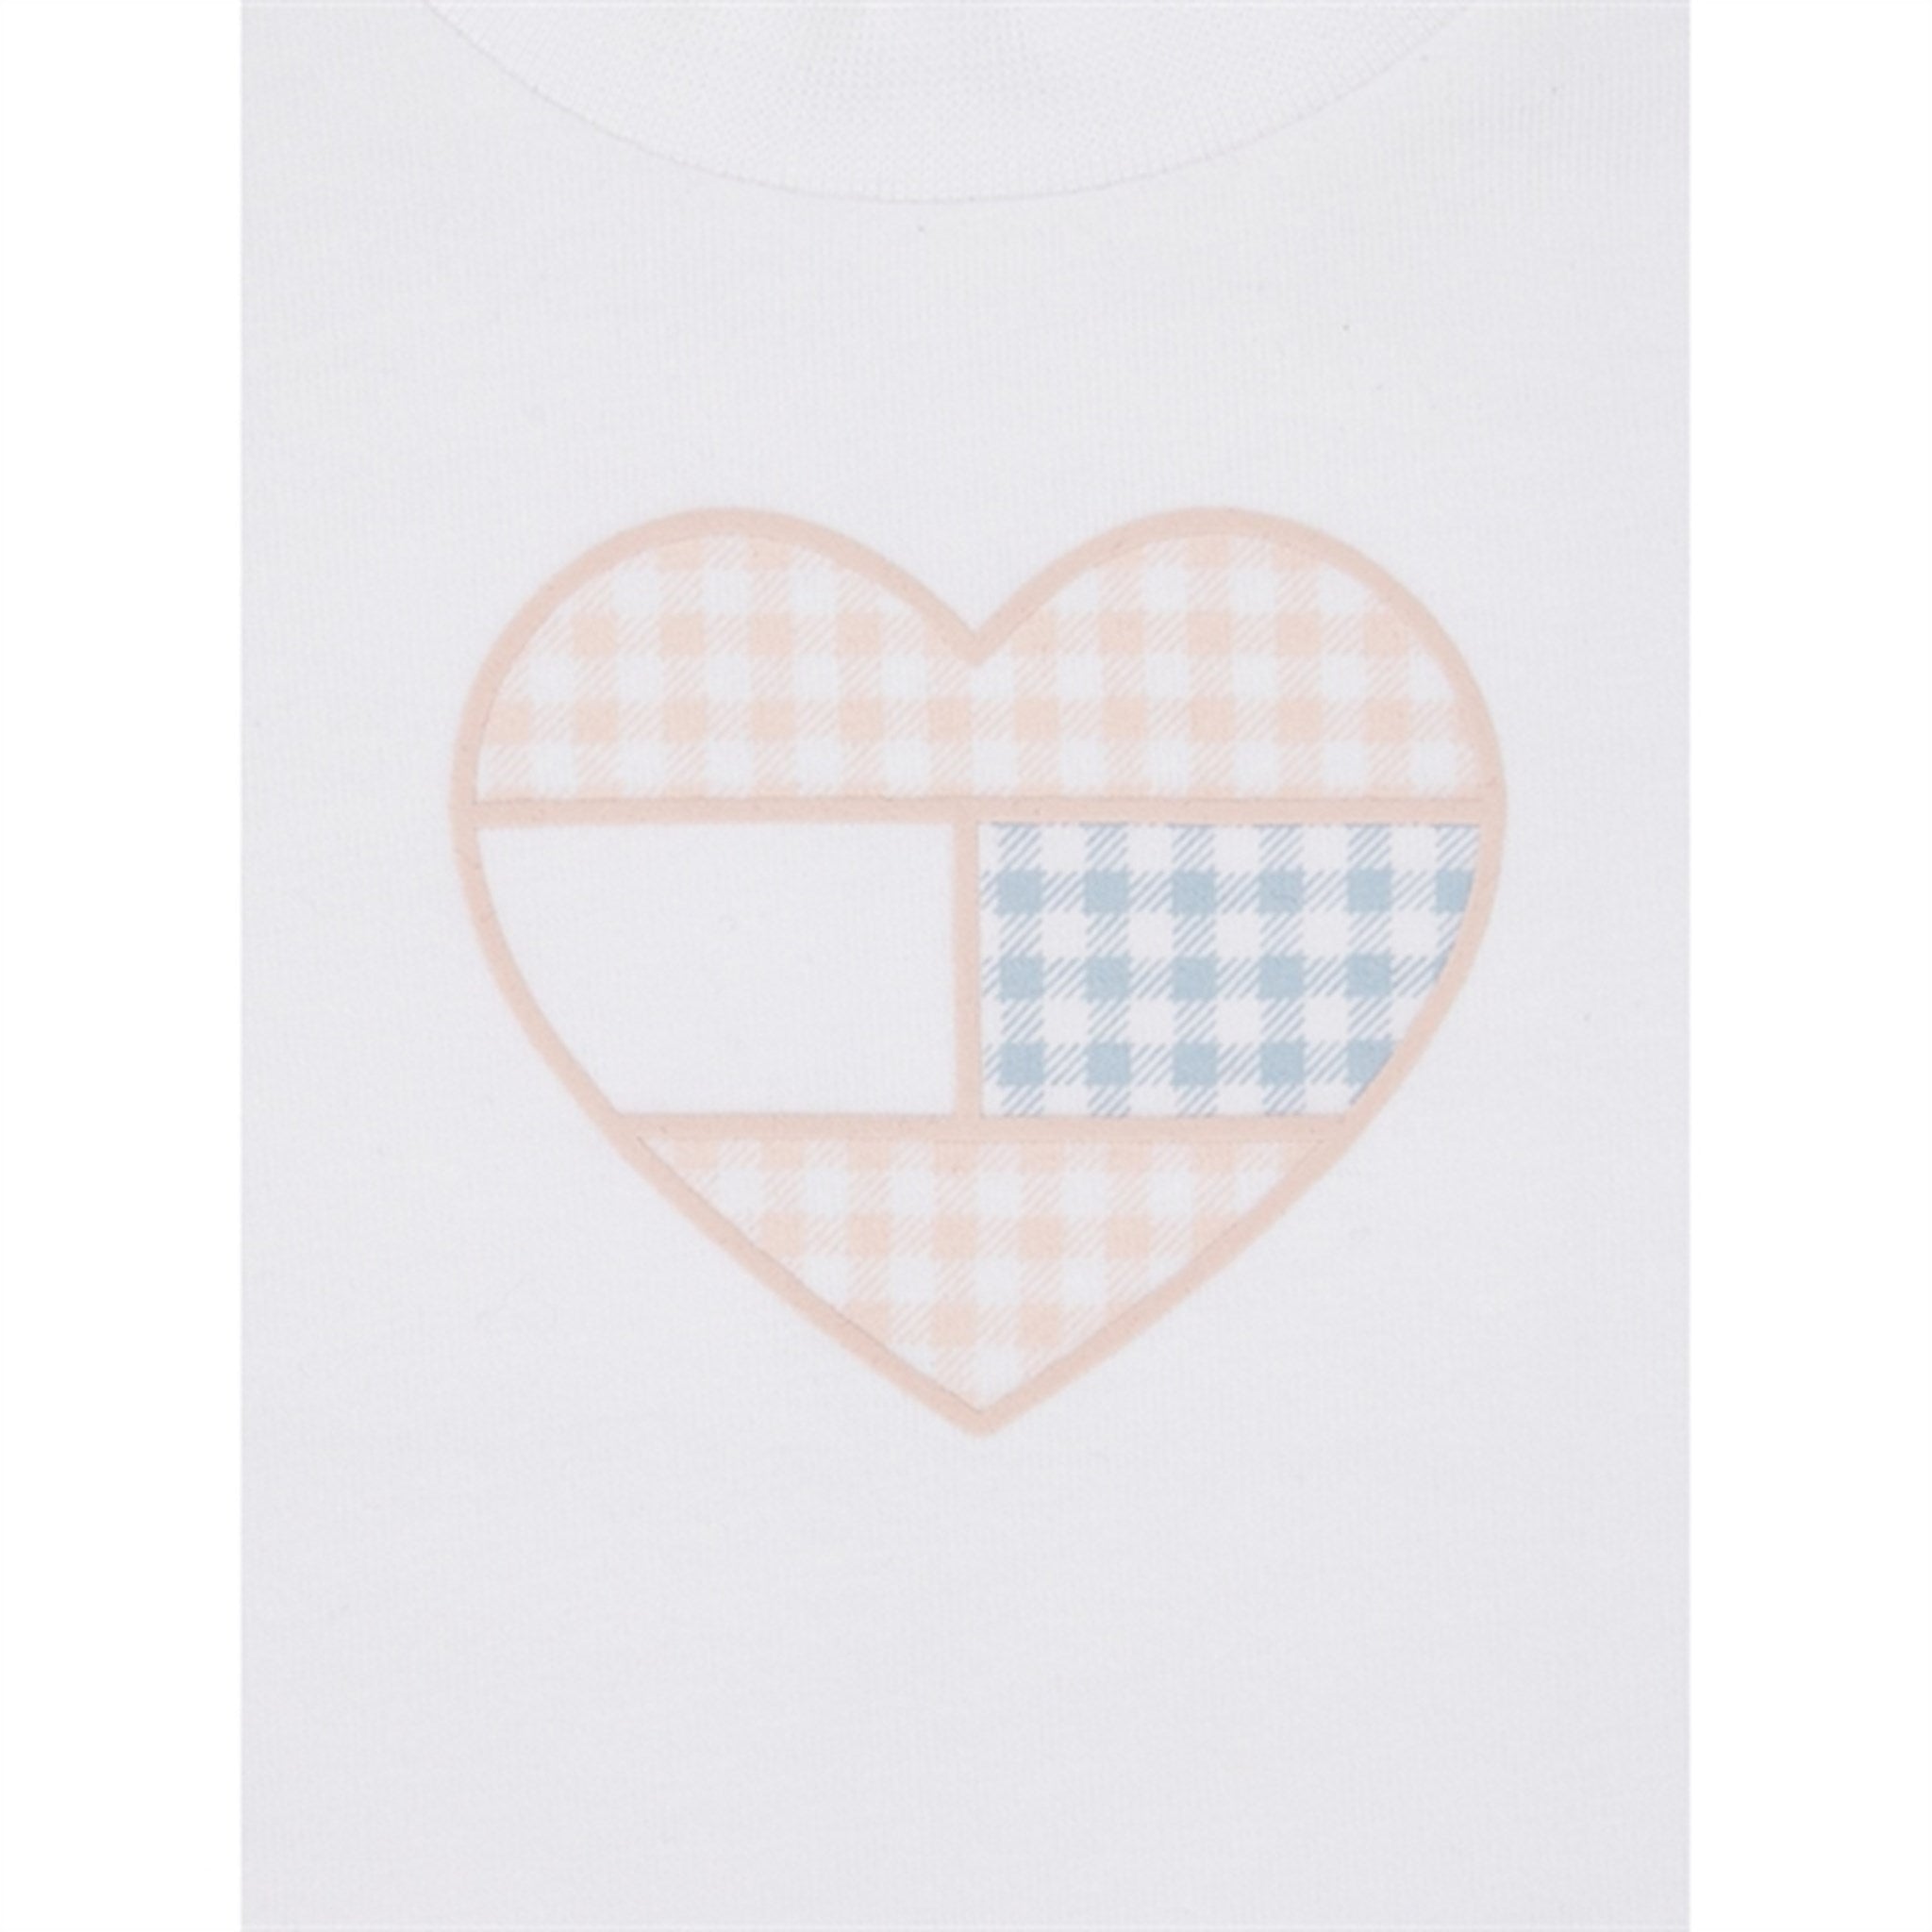 Tommy Hilfiger Baby Ruffle Gingham Flag T-Shirt White 2